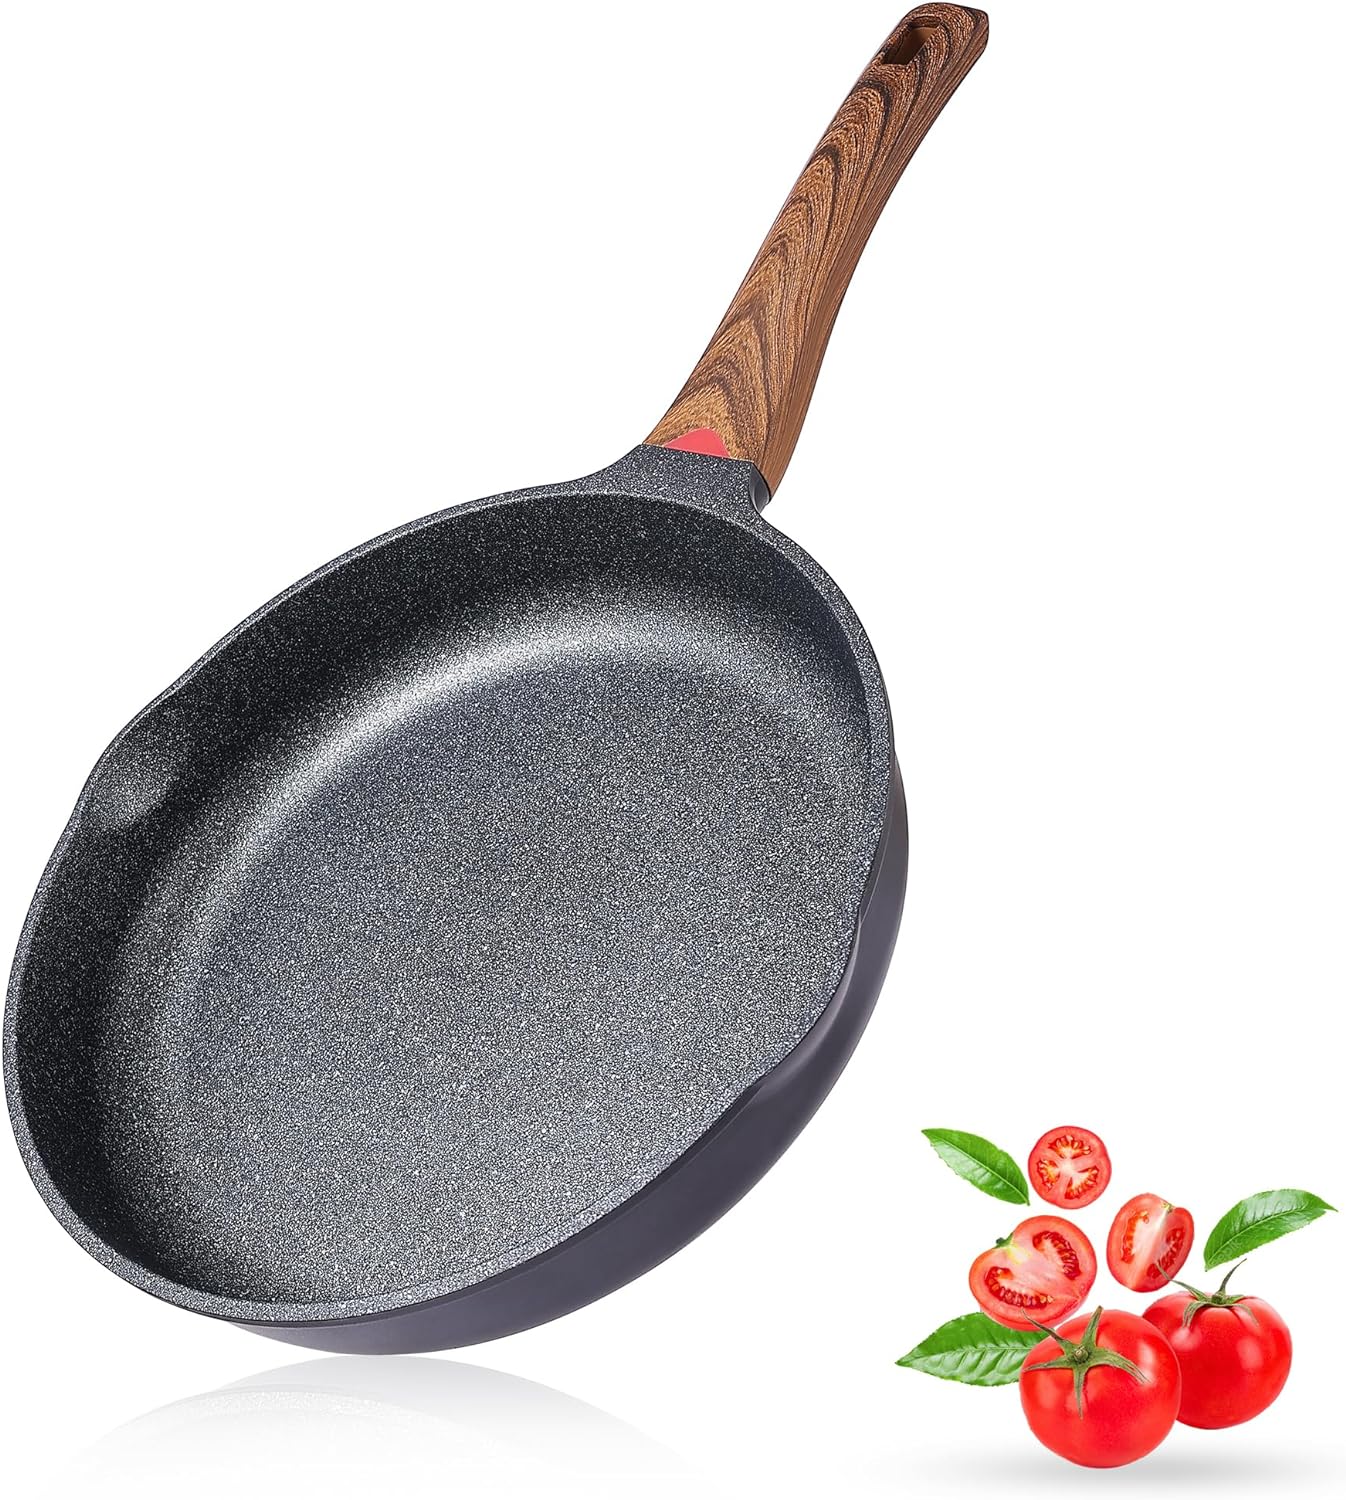 I have not owned a non stick pan before and this one is an eye opener. The handle is wood and there are no screws to clean around. Nothing sticks and so far everything cooked in this pan has been perfect.